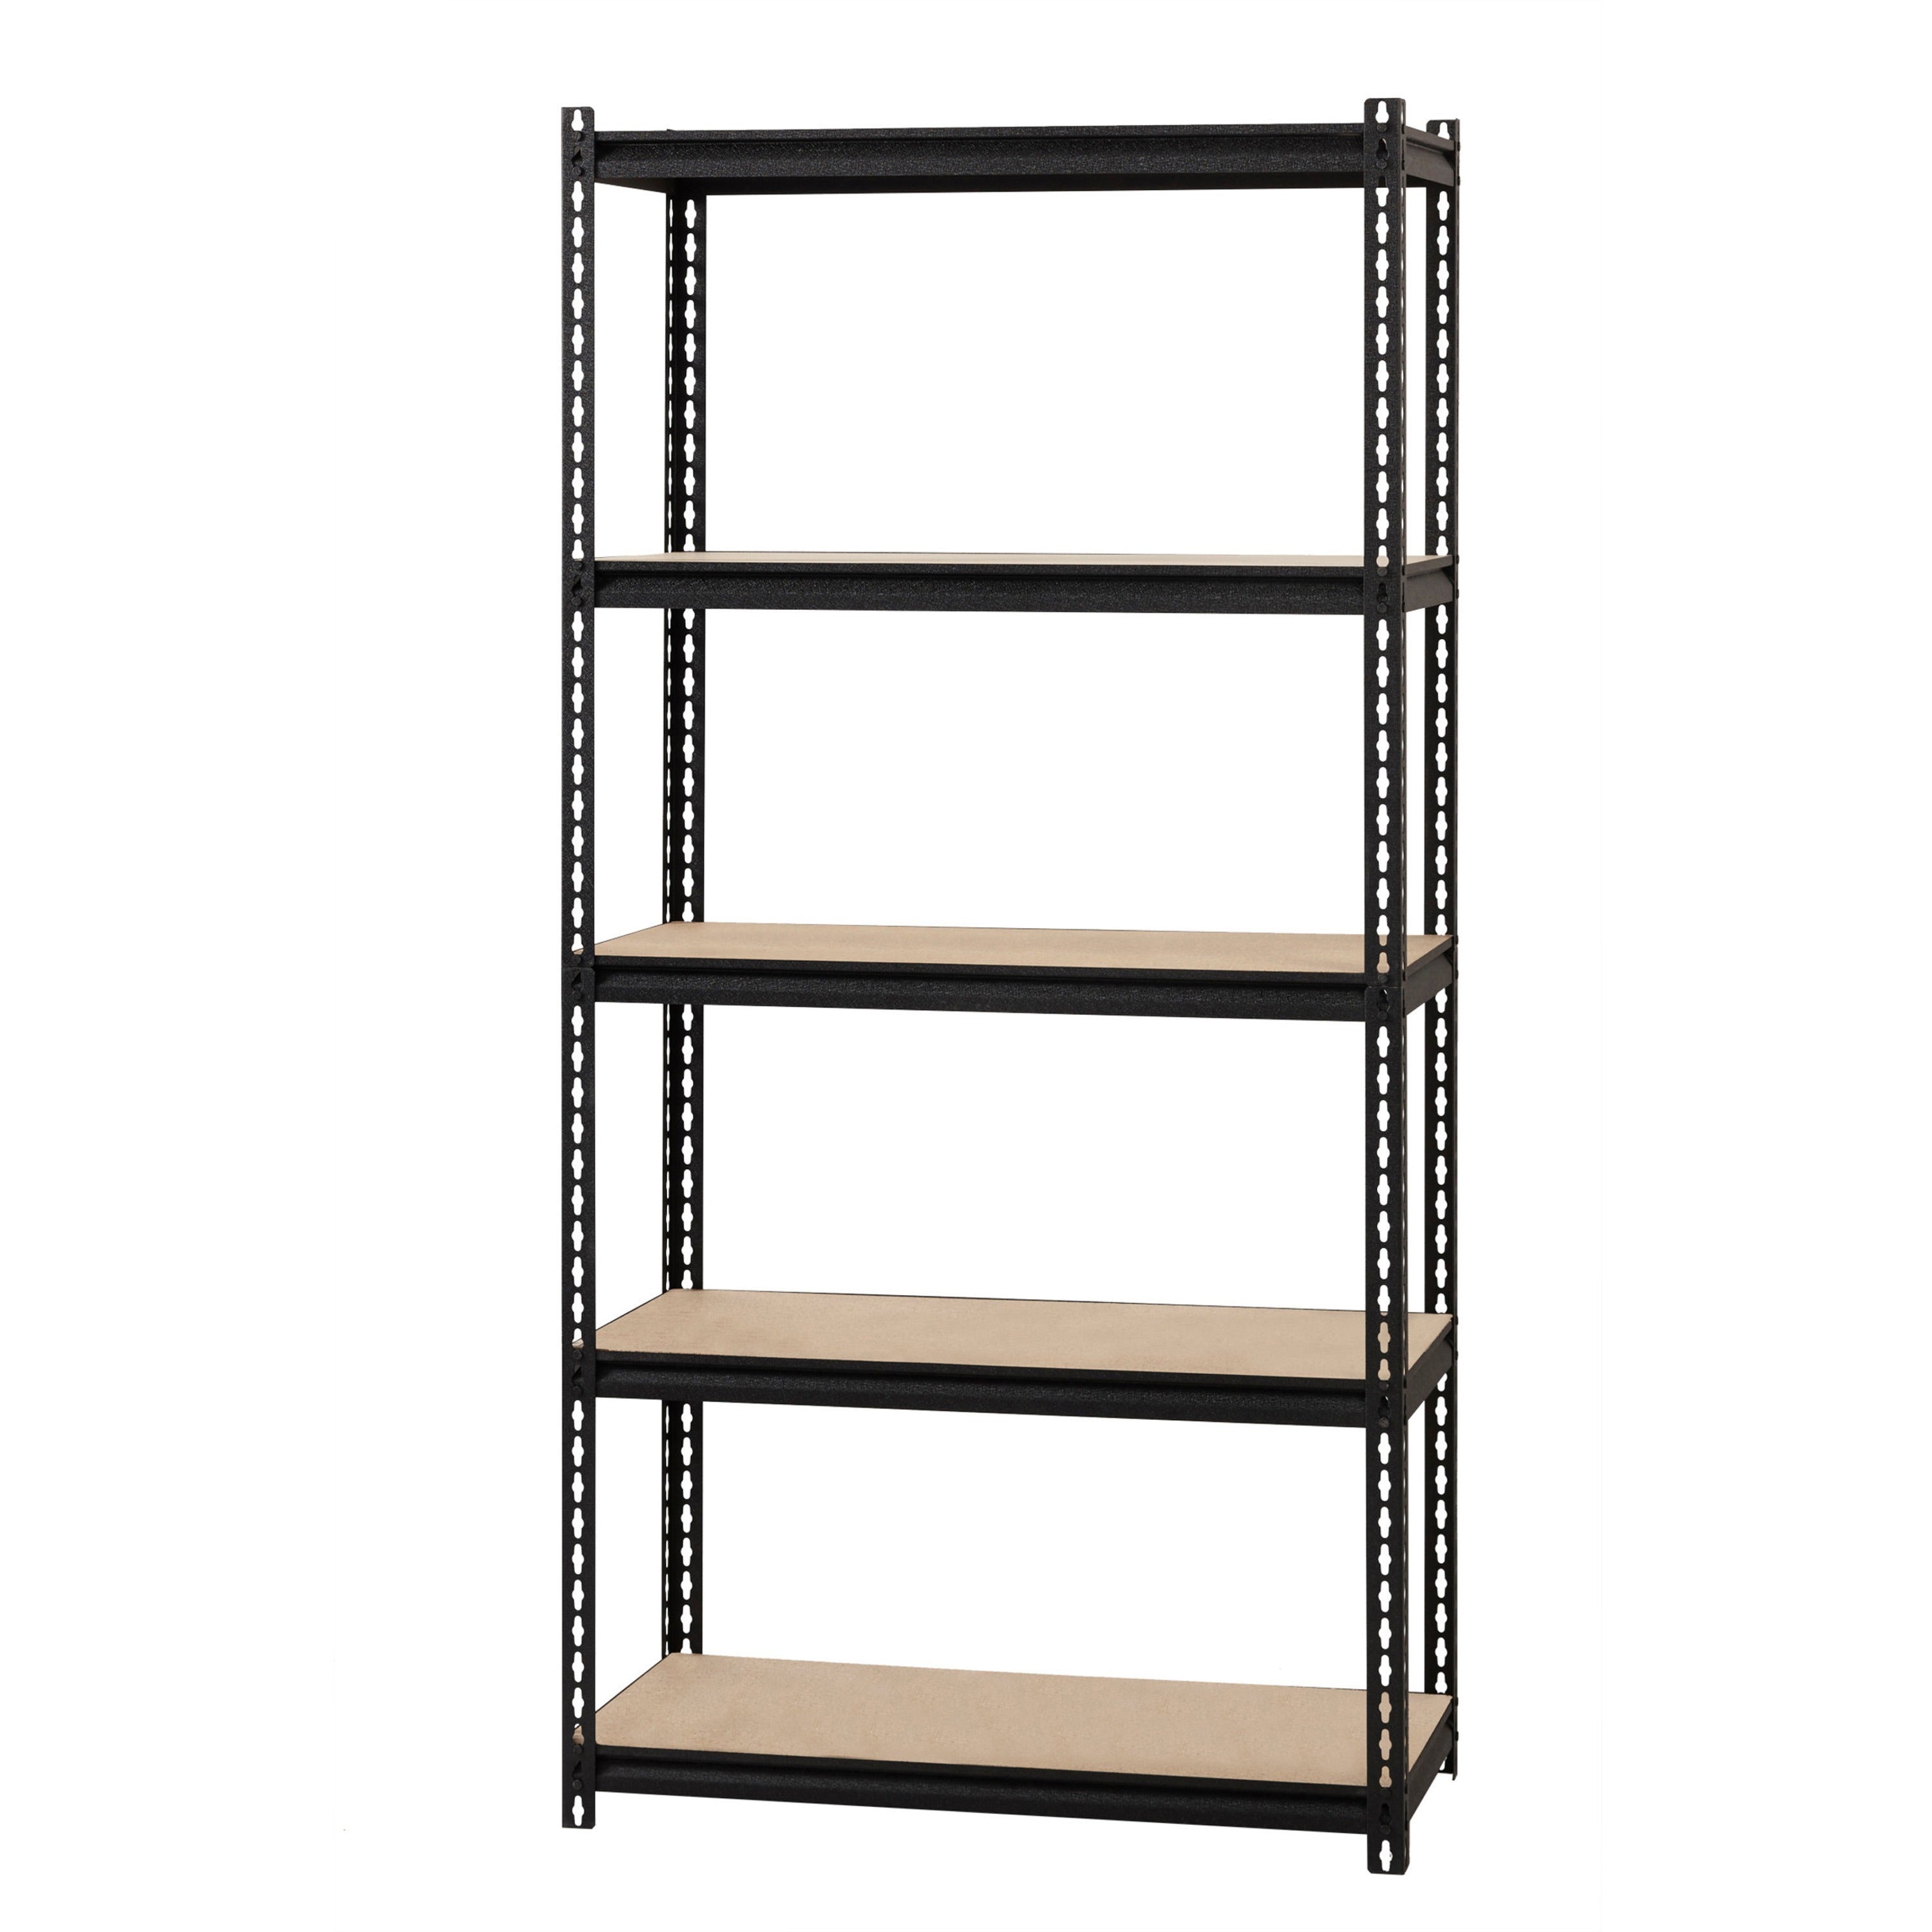 lorell-iron-horse-2300-lb-capacity-riveted-shelving-5-shelfves-72-height-x-36-width-x-18-depth-30%-recycled-black-steel-particleboard-1-each_llr59697 - 2